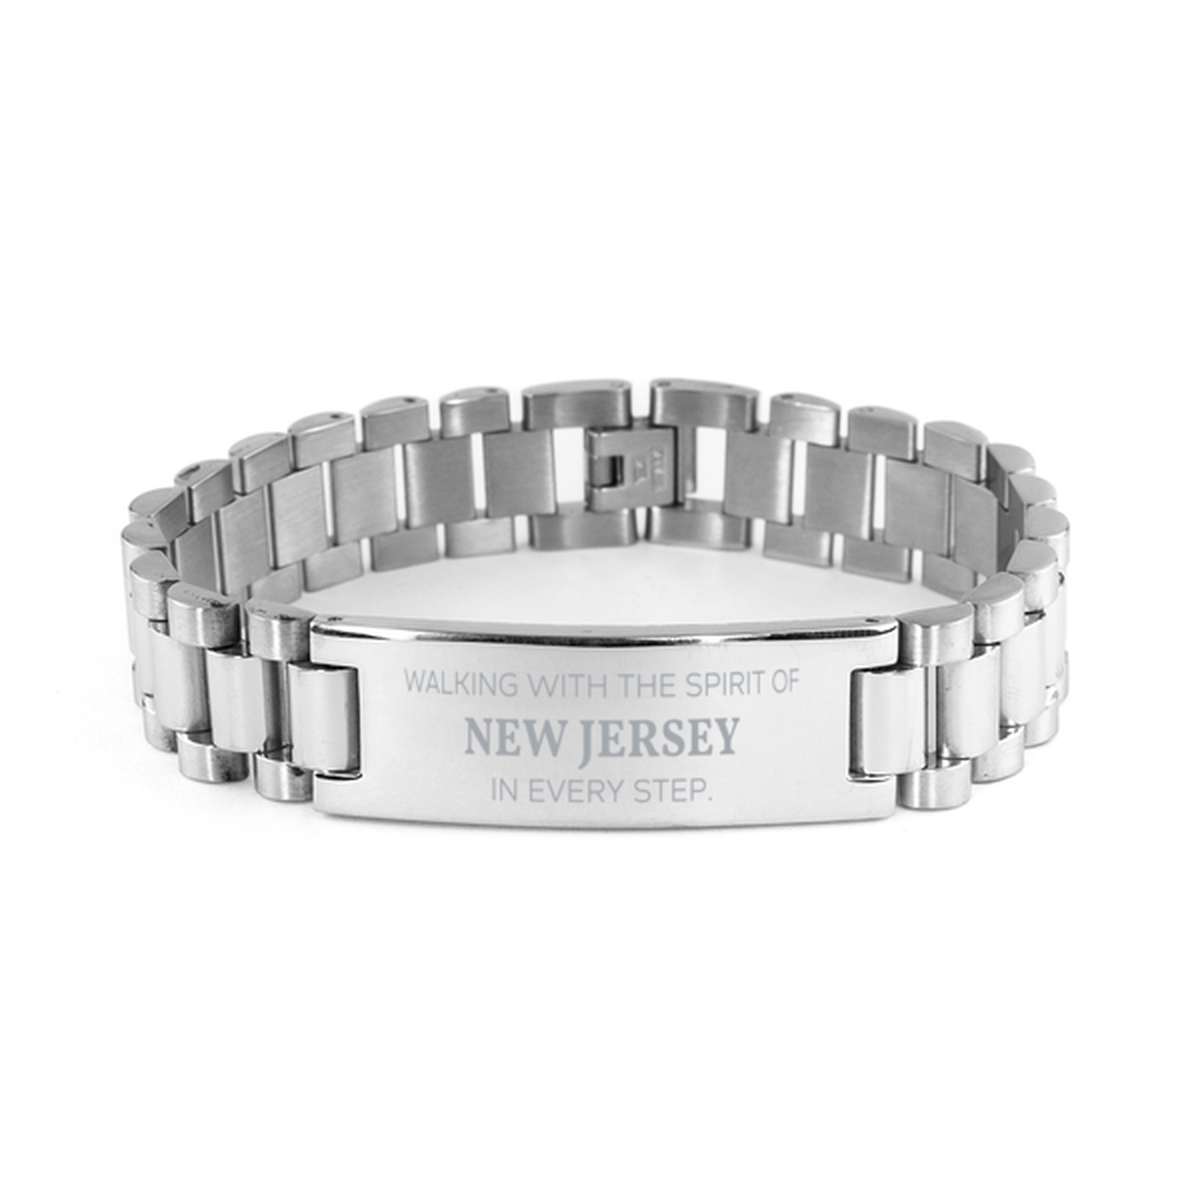 New Jersey Gifts, Walking with the spirit, Love New Jersey Birthday Christmas Ladder Stainless Steel Bracelet For New Jersey People, Men, Women, Friends